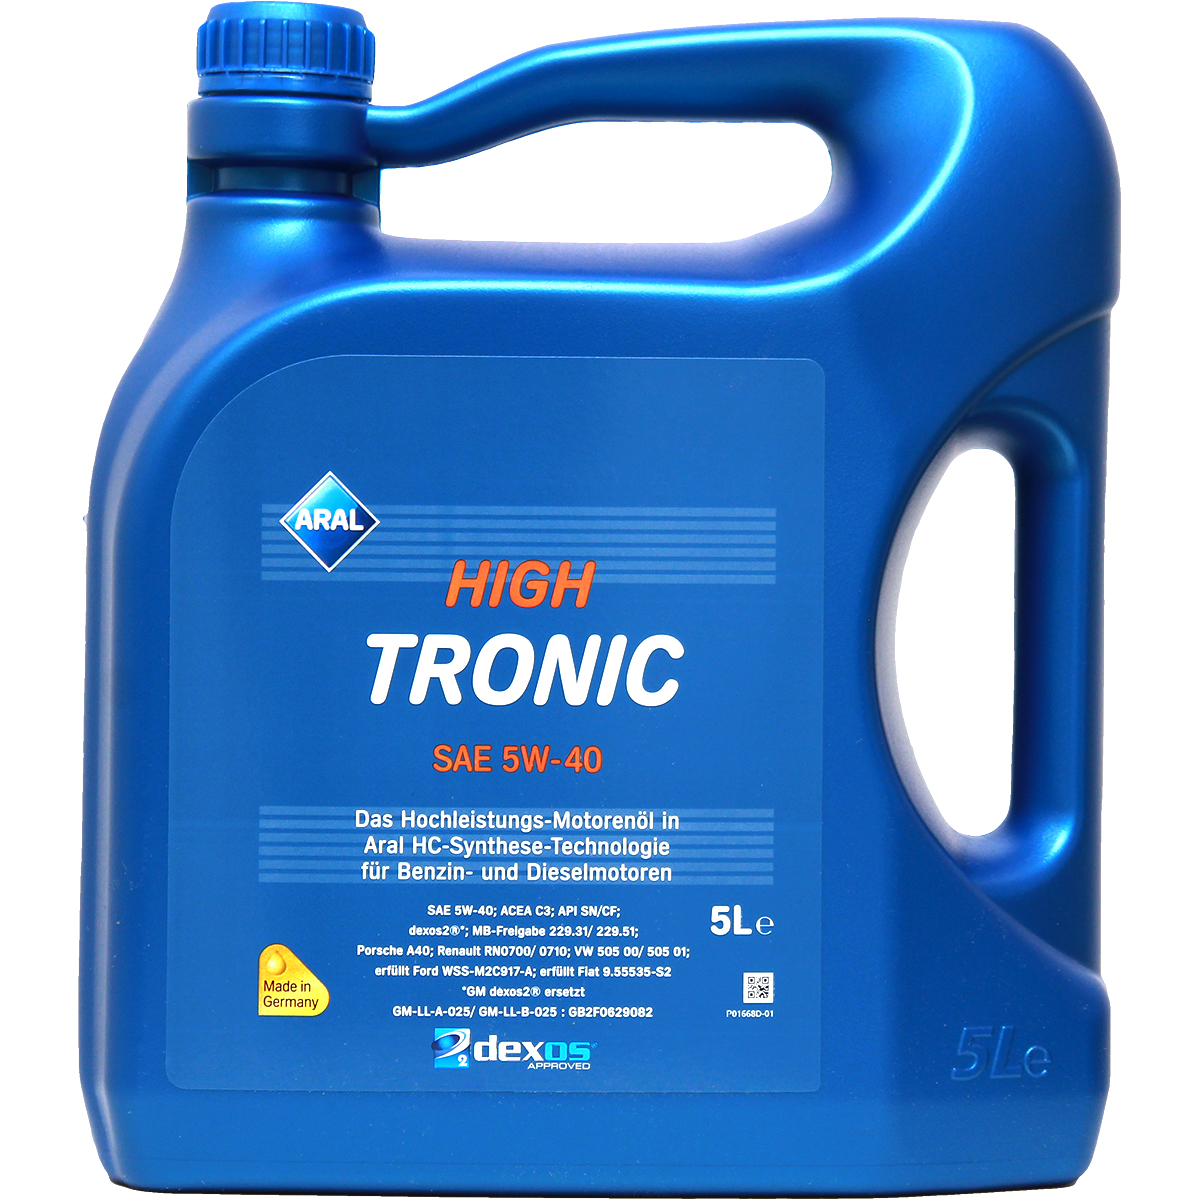 Aral HighTronic 5W-40 5+2 Liter